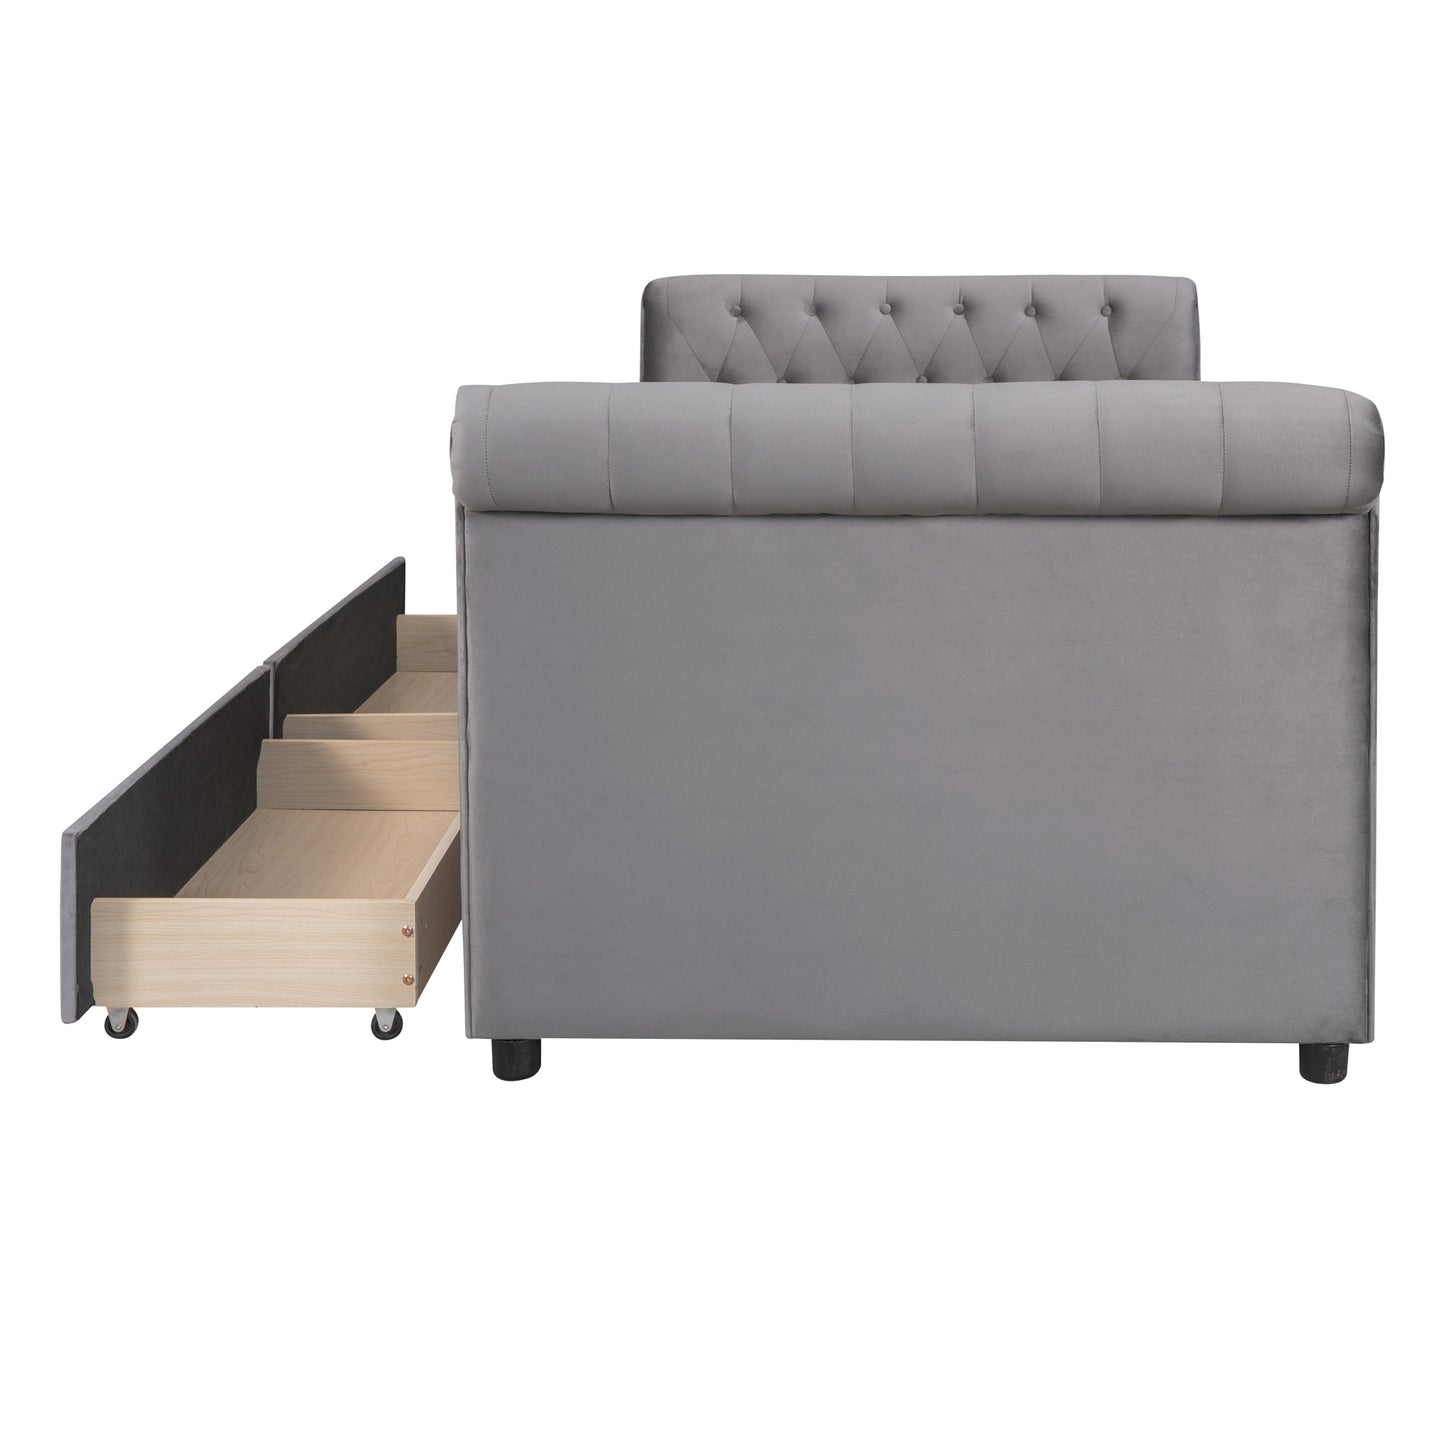 Twin Size Upholstered daybed with Drawers, Wood Slat Support, Gray